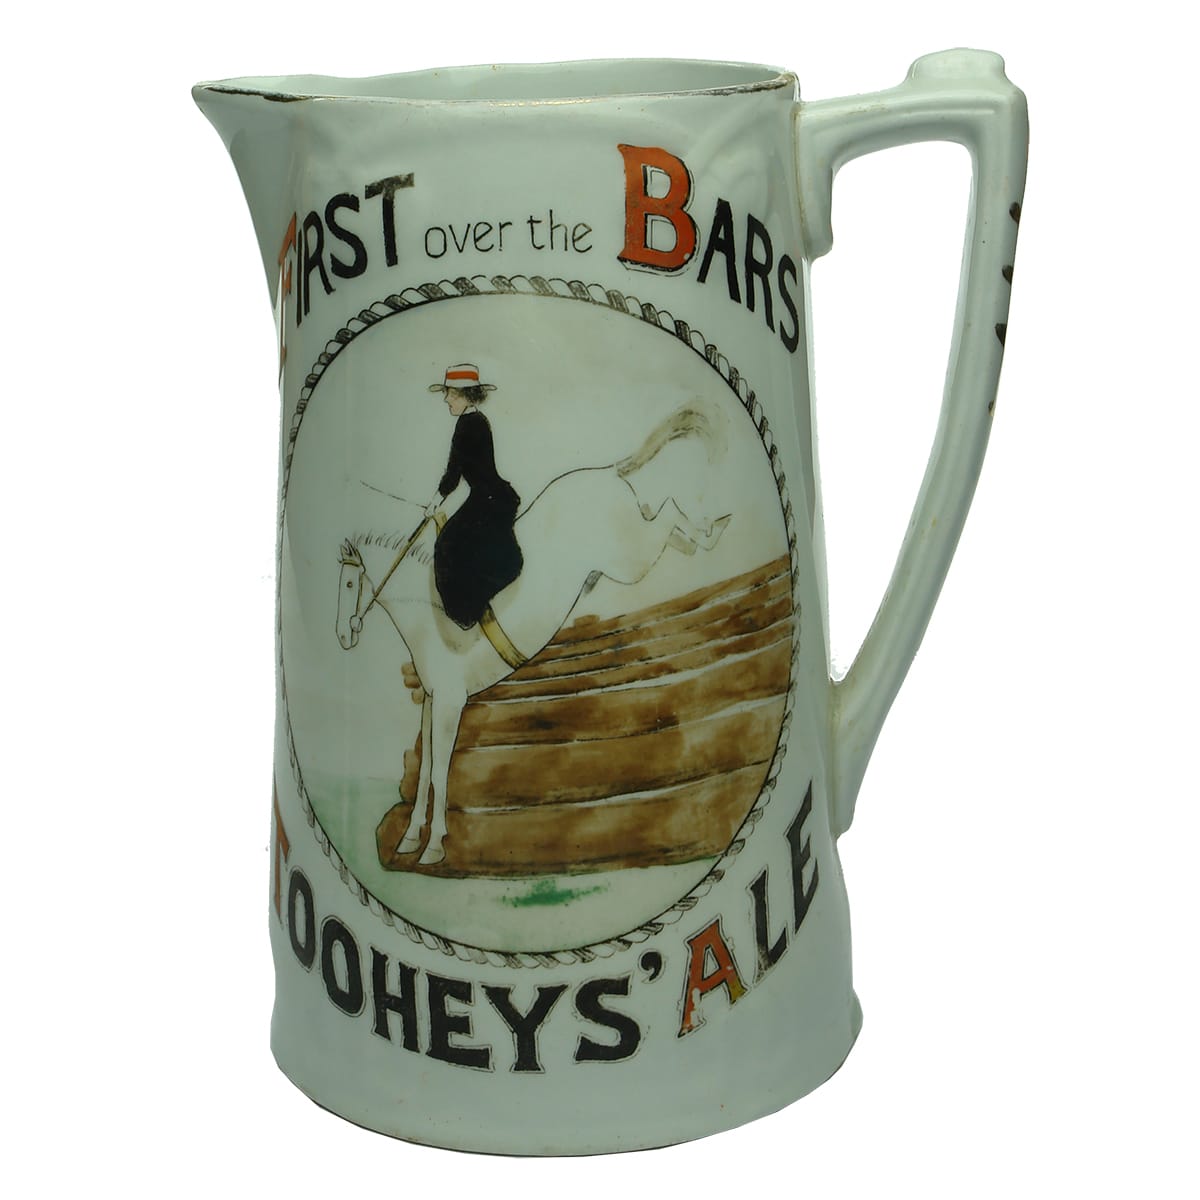 Beer Advertising Water Jug. Tooheys' Ale. First over the Bars. Multi-coloured. (Sydney, New South Wales)